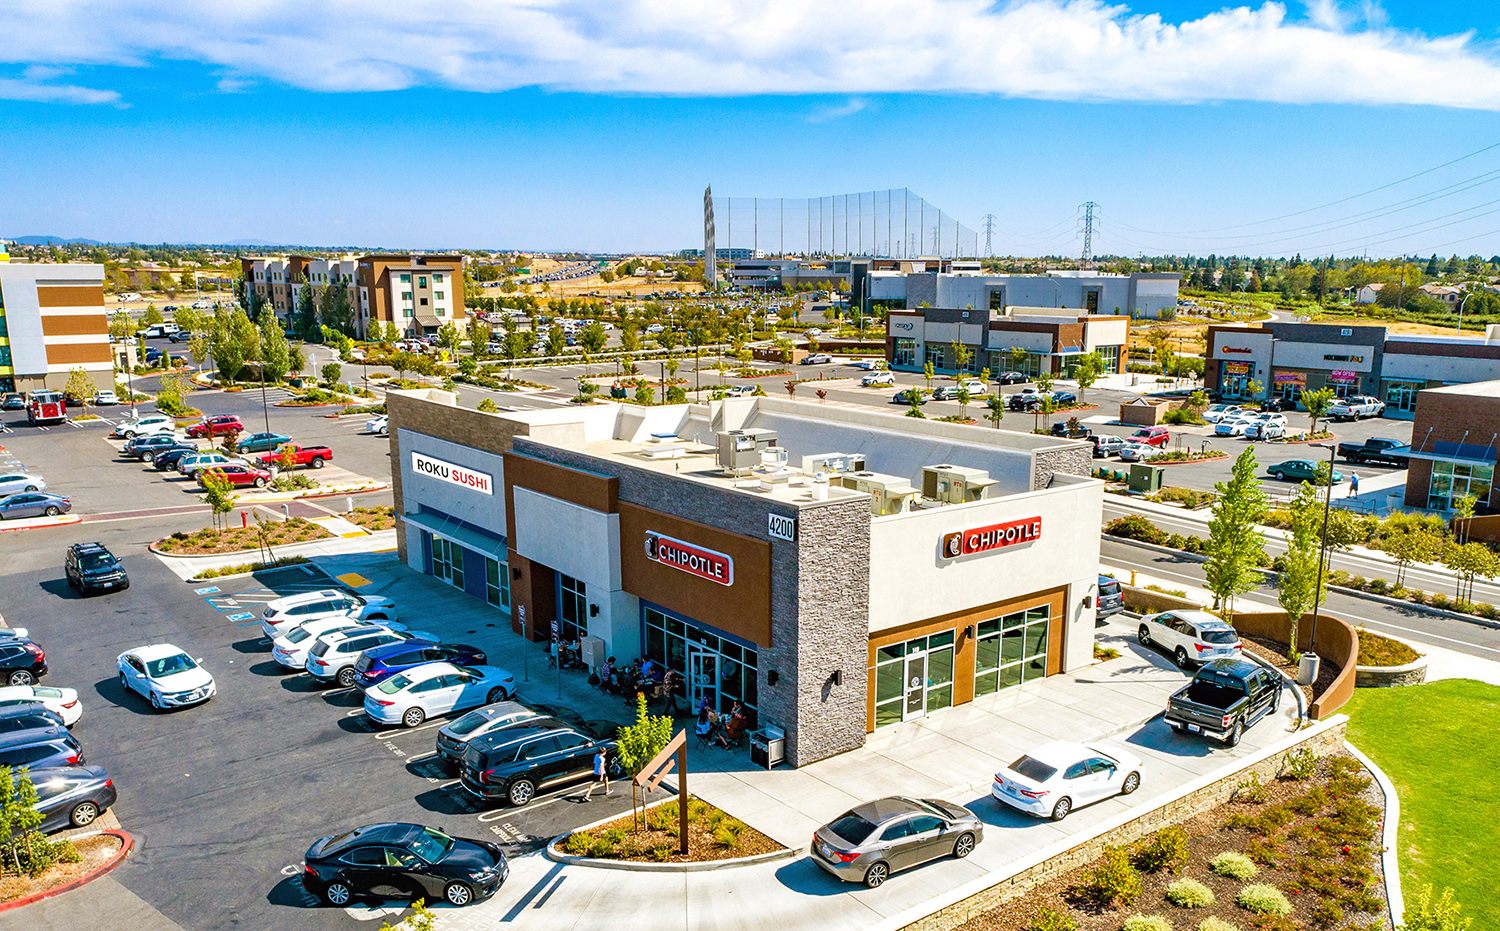 Hanley Investment Group Arranges Sale of New Two-Tenant Chipotle Drive-Thru Pad in Sacramento Metro for Over $4 Million